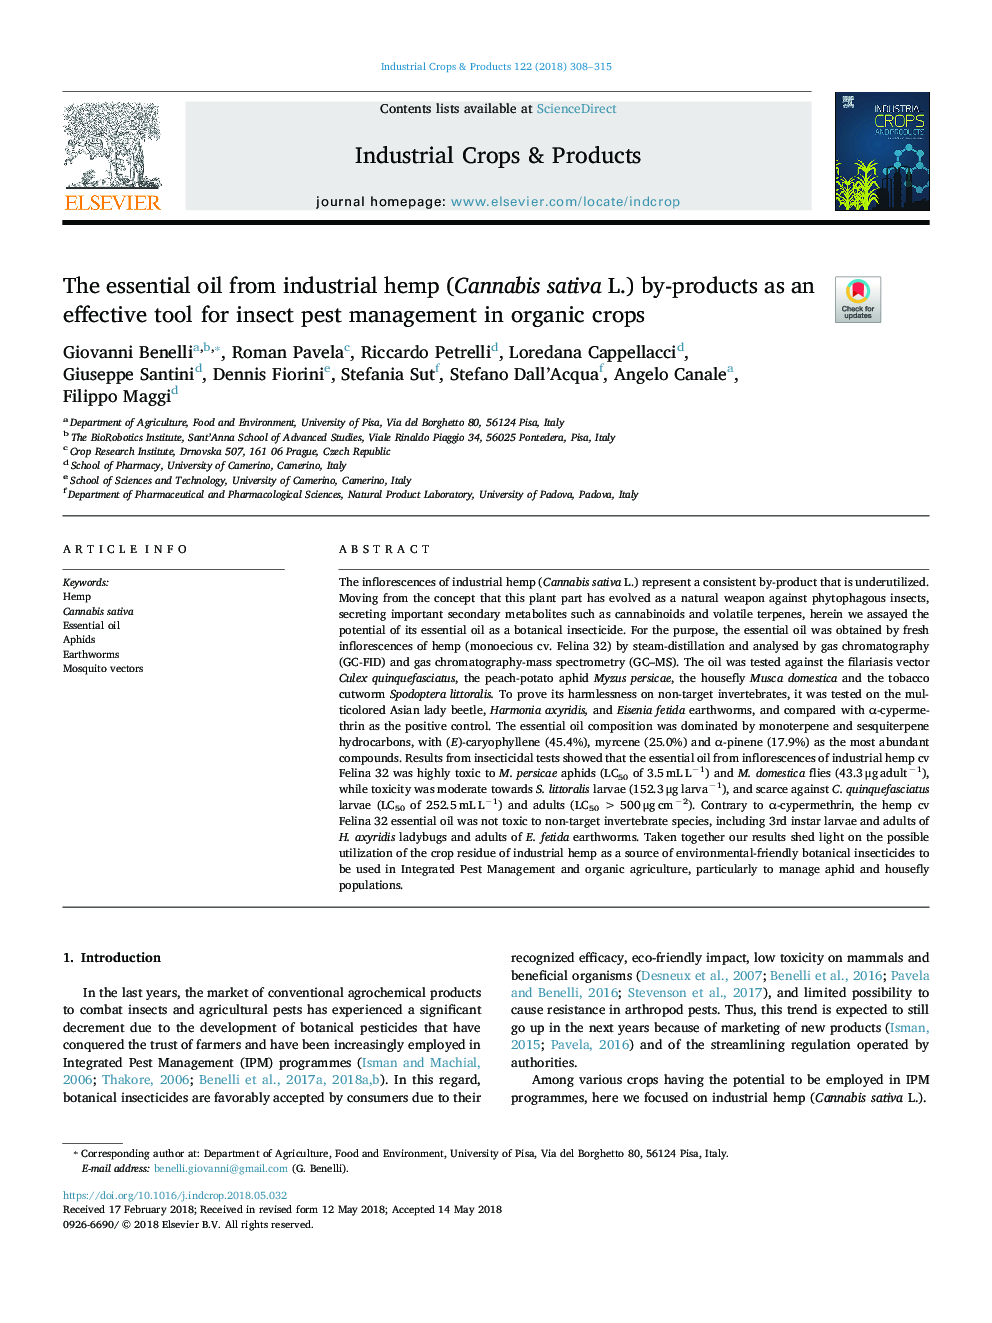 The essential oil from industrial hemp (Cannabis sativa L.) by-products as an effective tool for insect pest management in organic crops